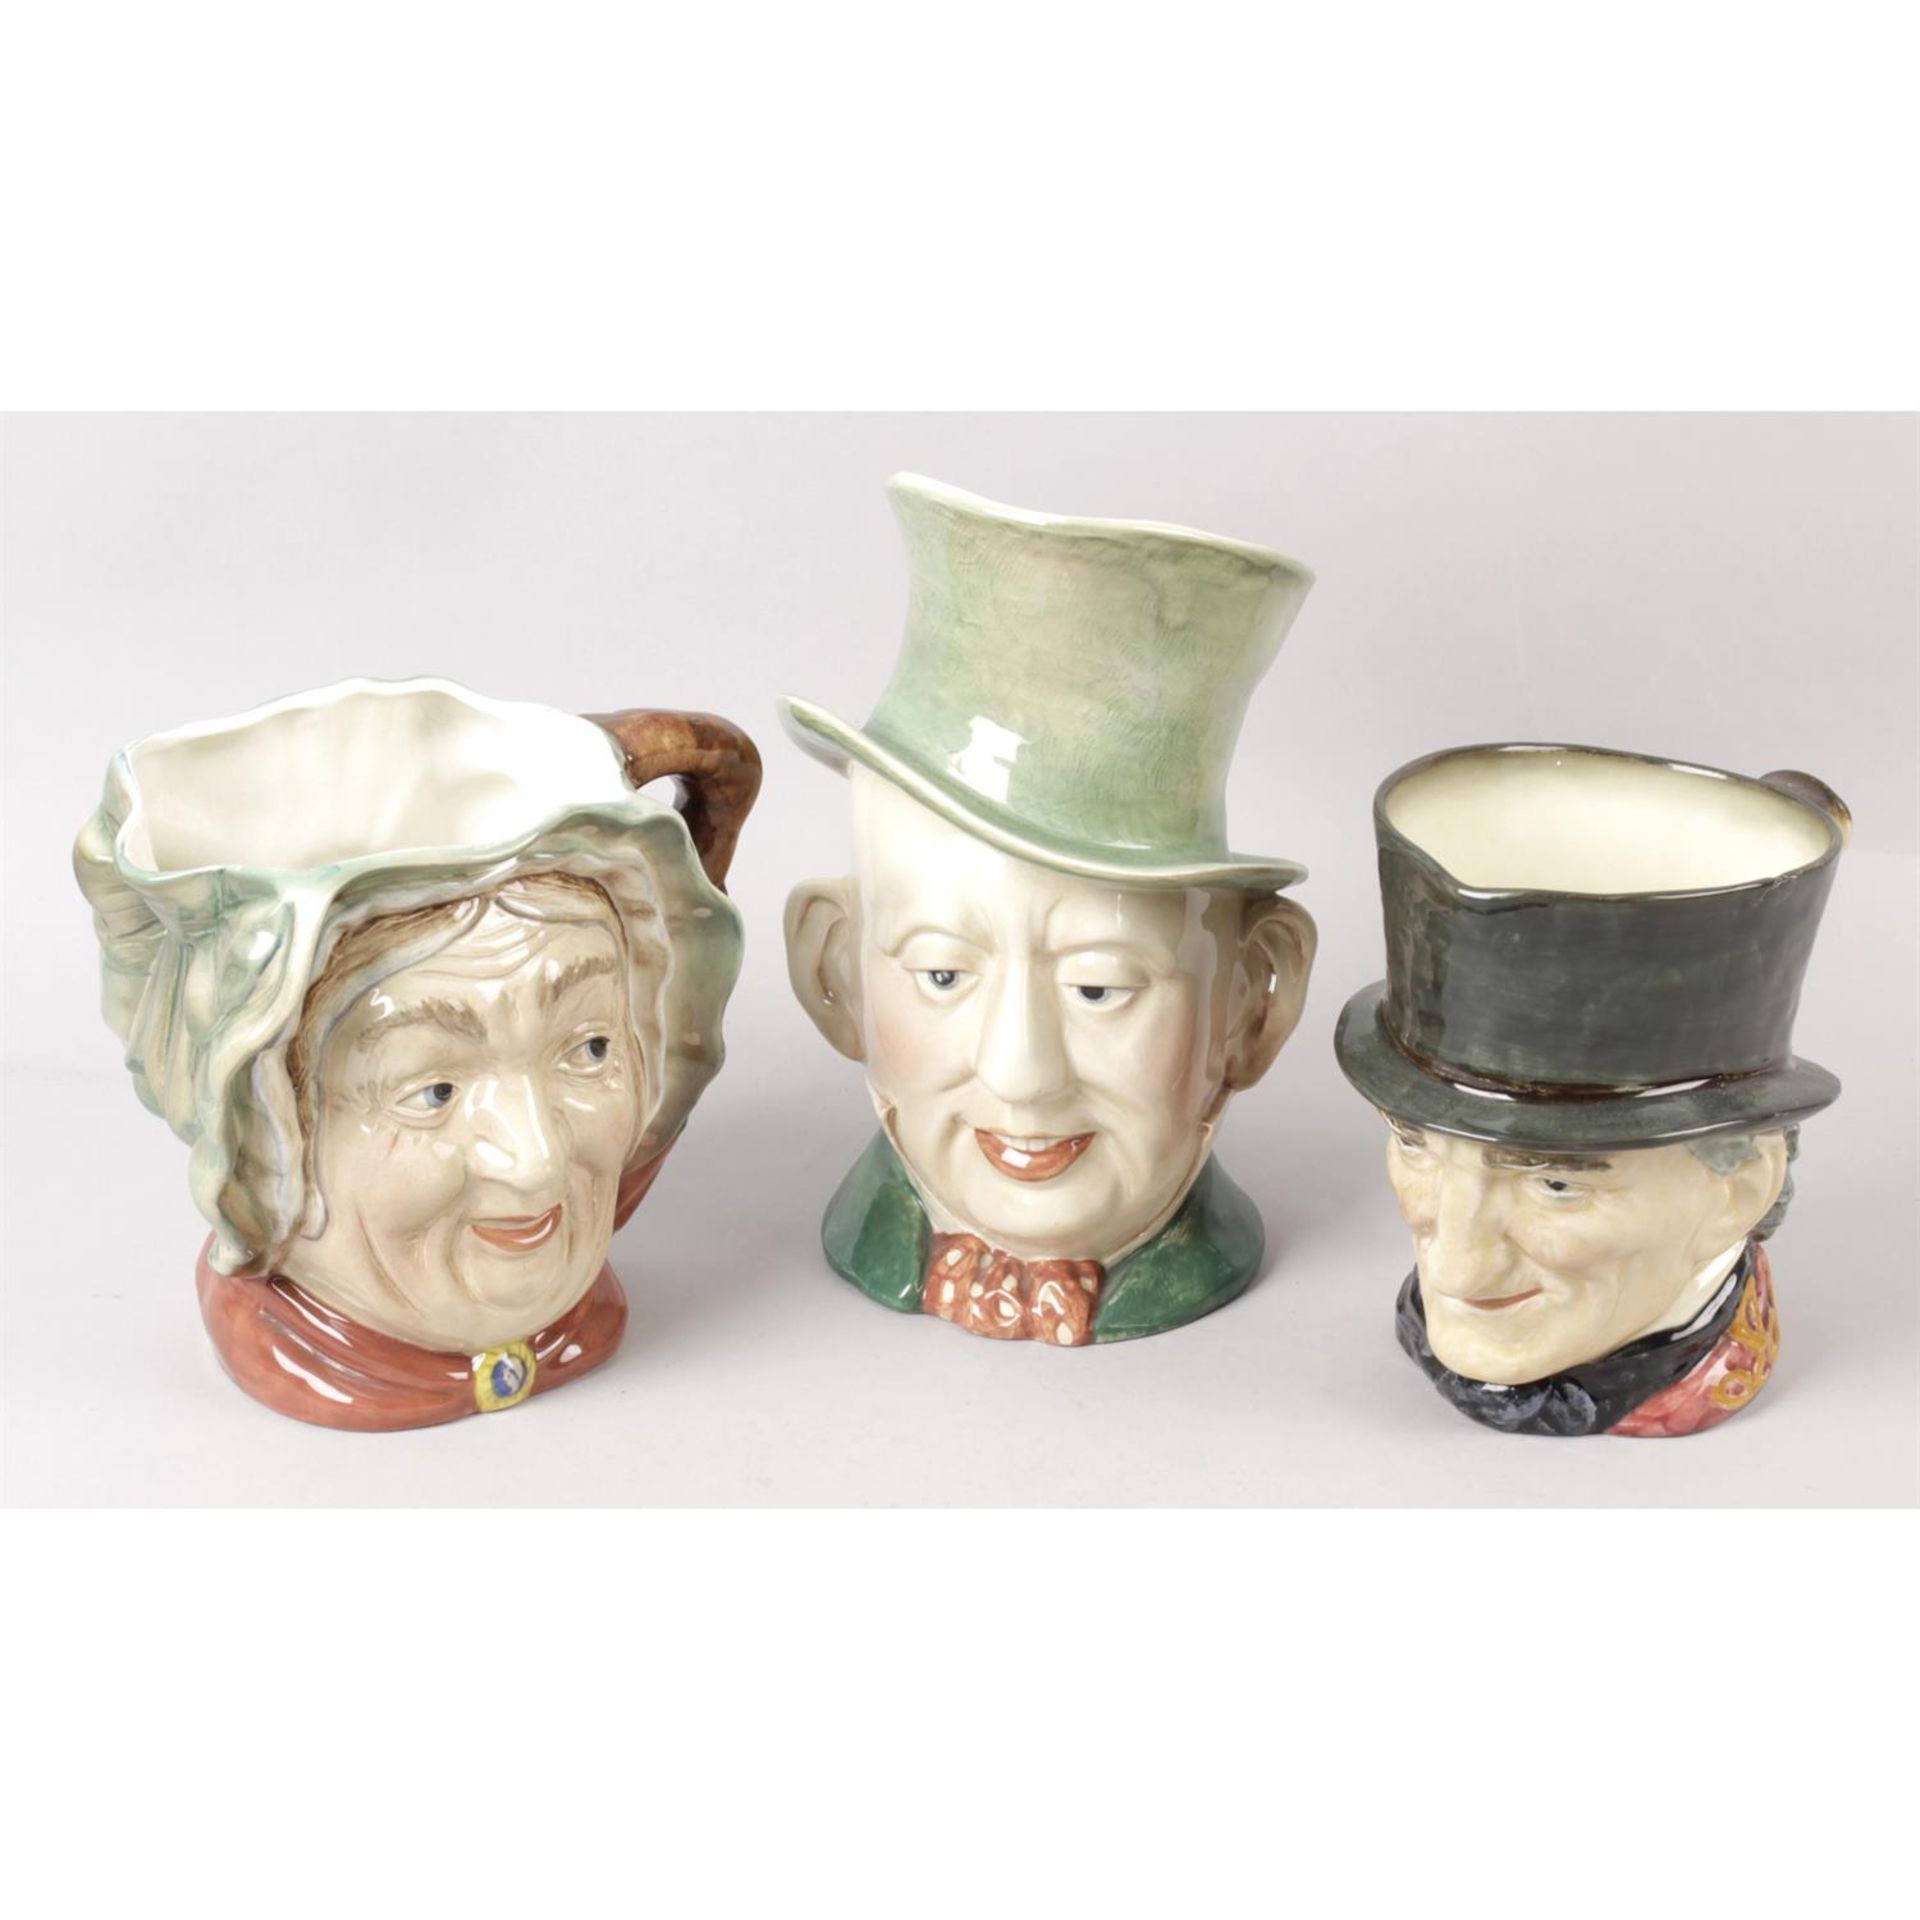 Two Royal Doulton character jugs, together with similar examples, etc.